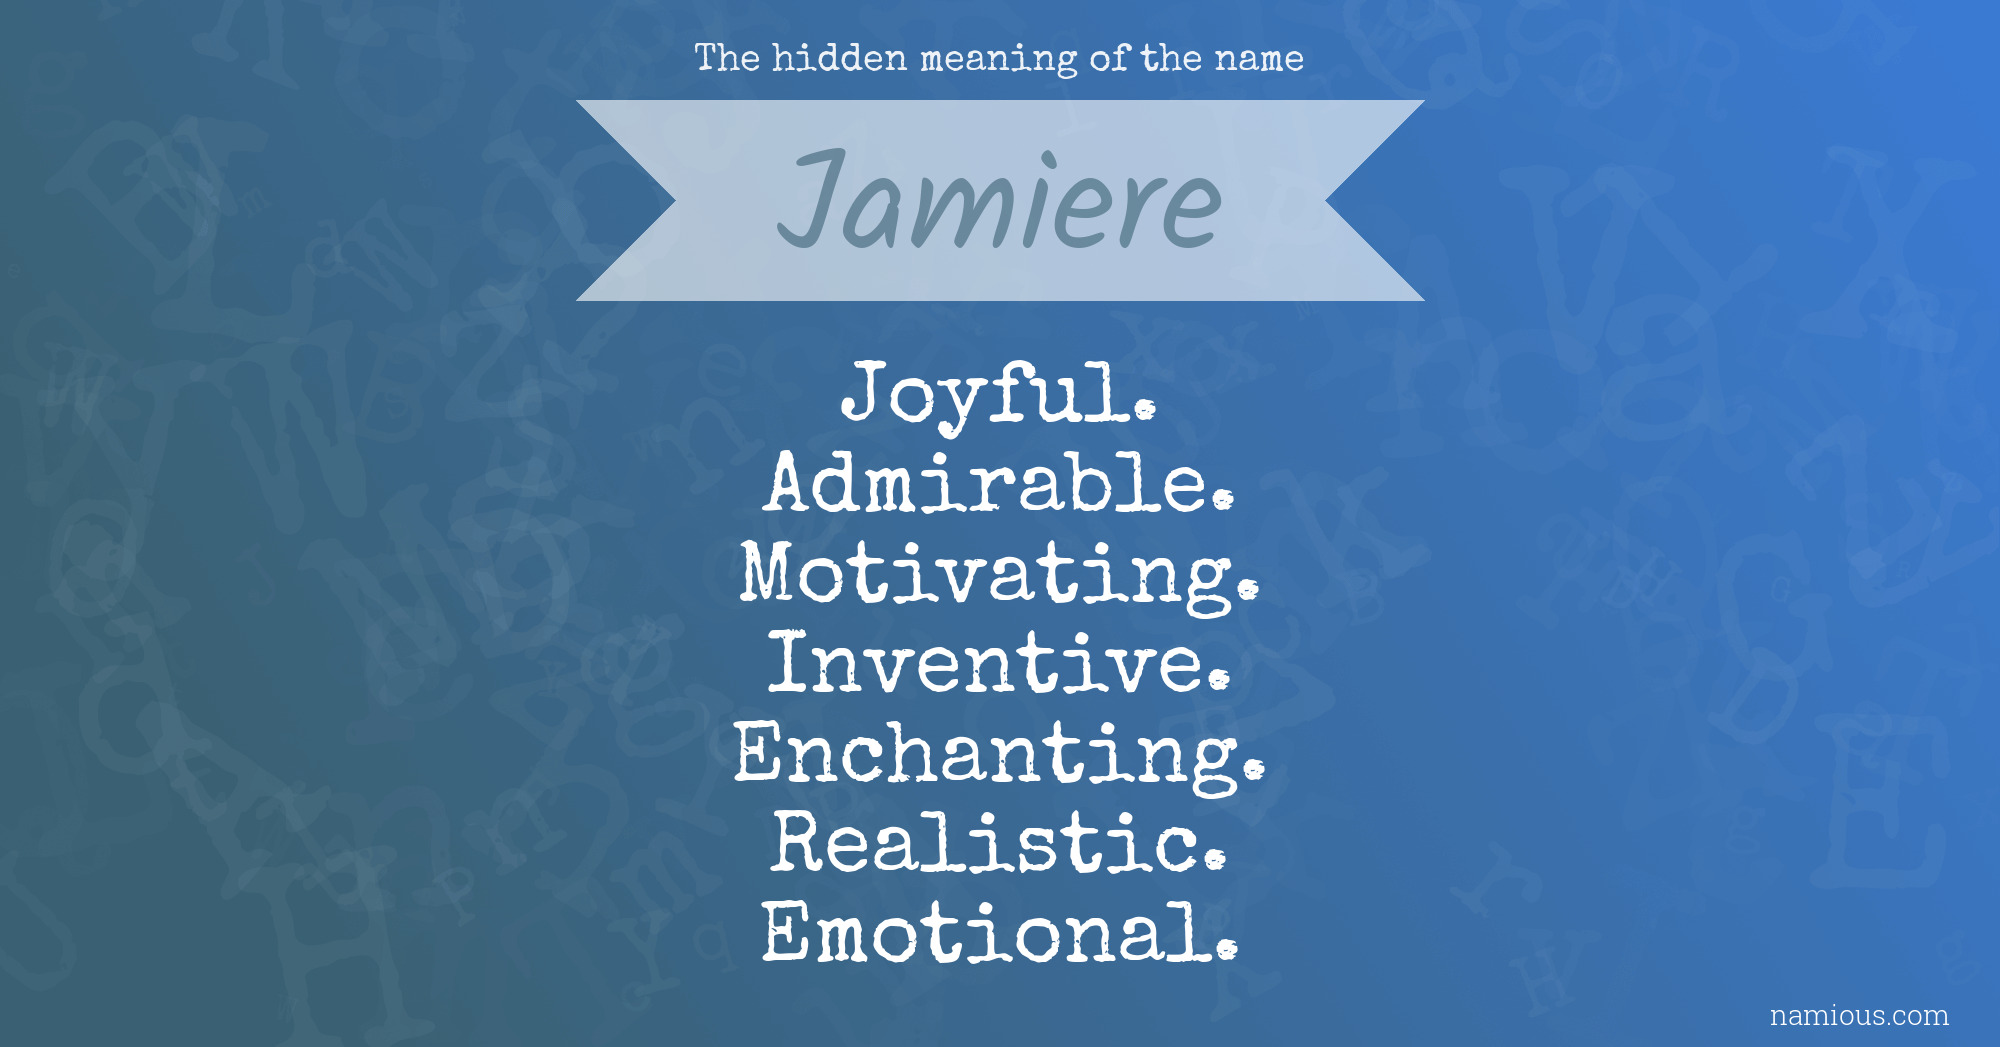 The hidden meaning of the name Jamiere